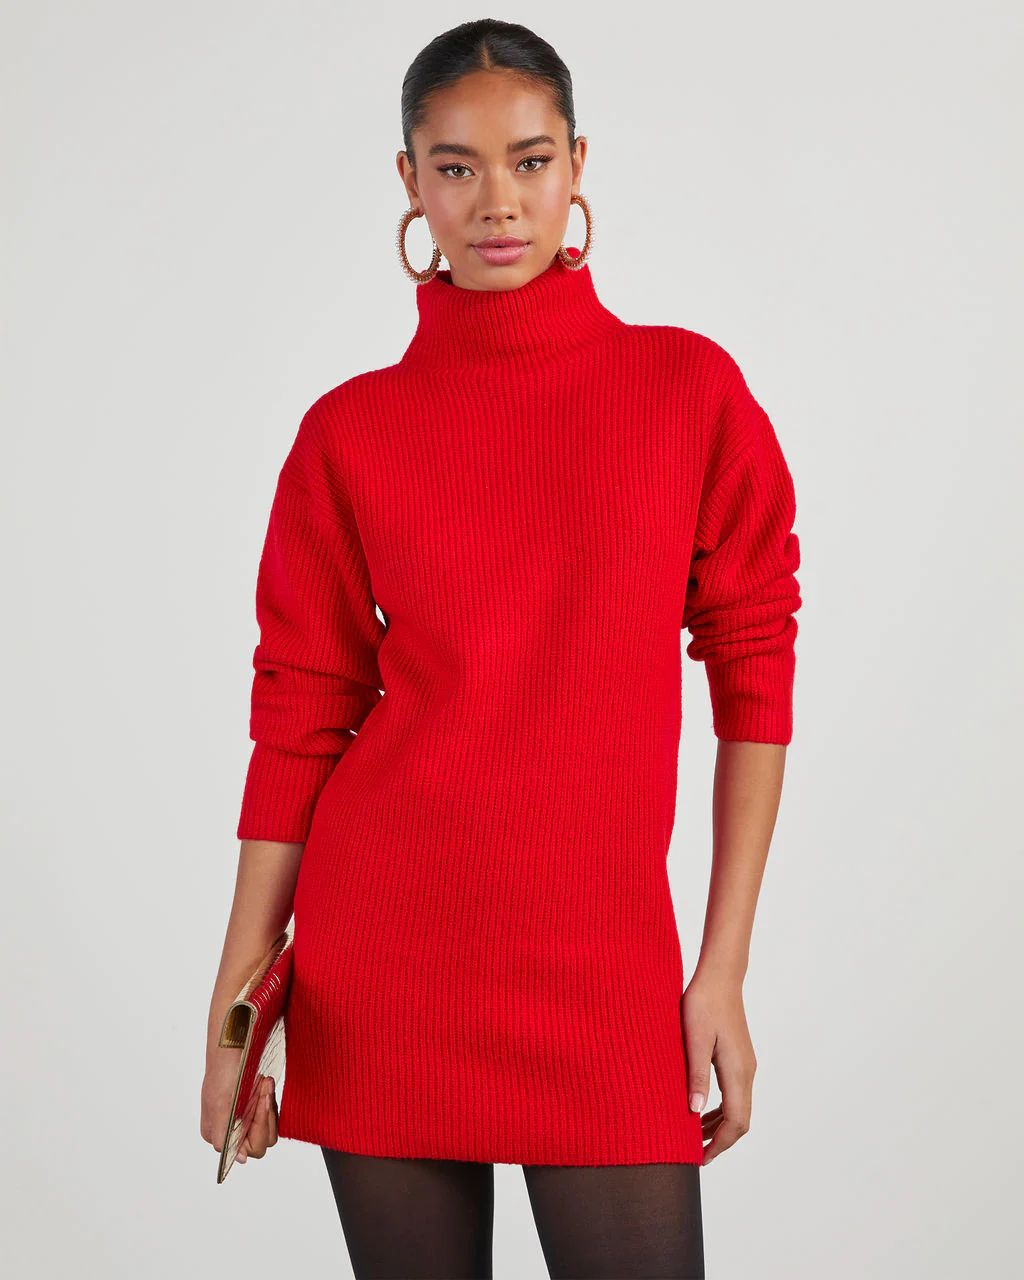 Uptown Girl Mock Neck Sweater Dress | VICI Collection